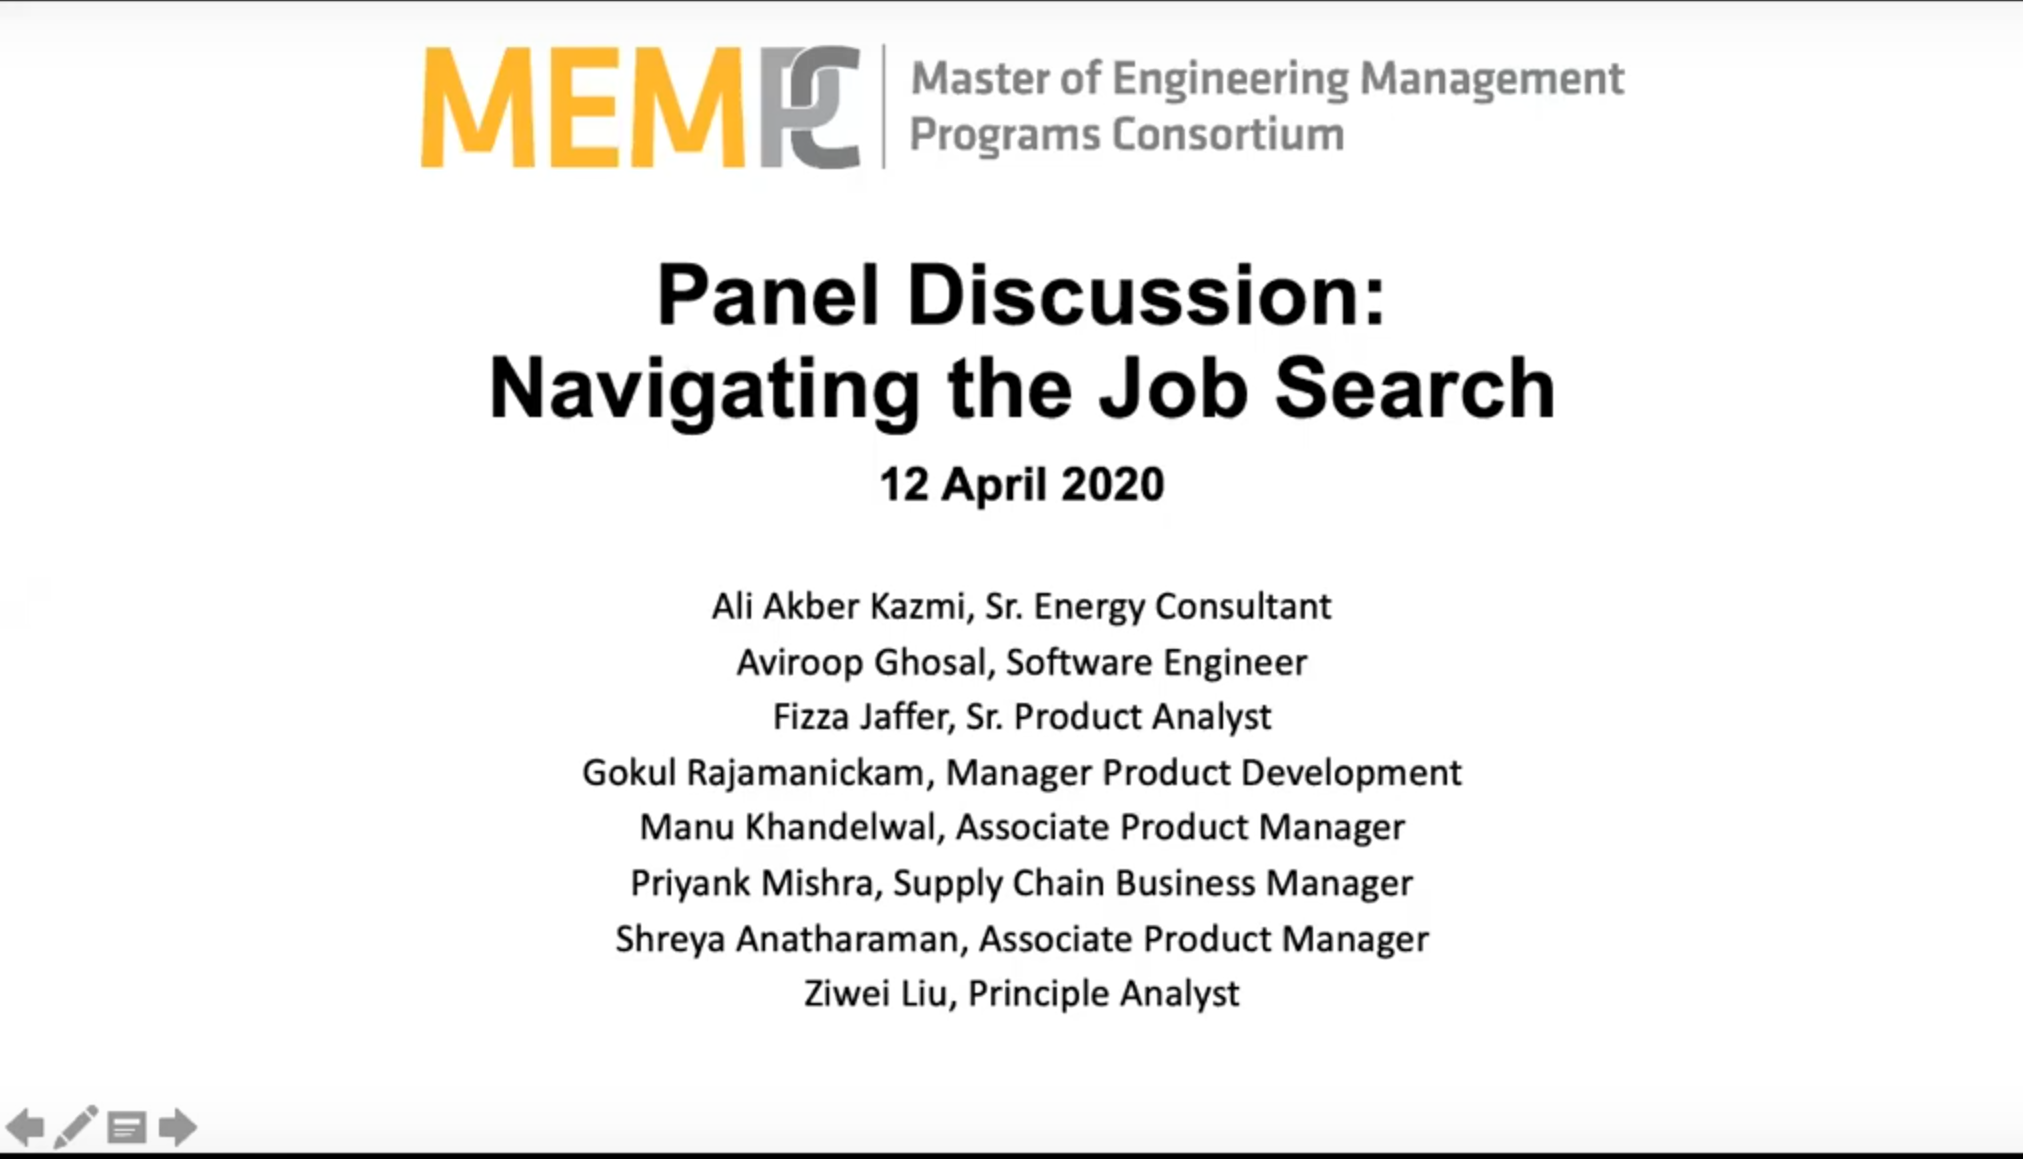 MEMPC Panel Discussion on Navigating the Job Search with Master of Engineering Management alumni from MEMPC programs